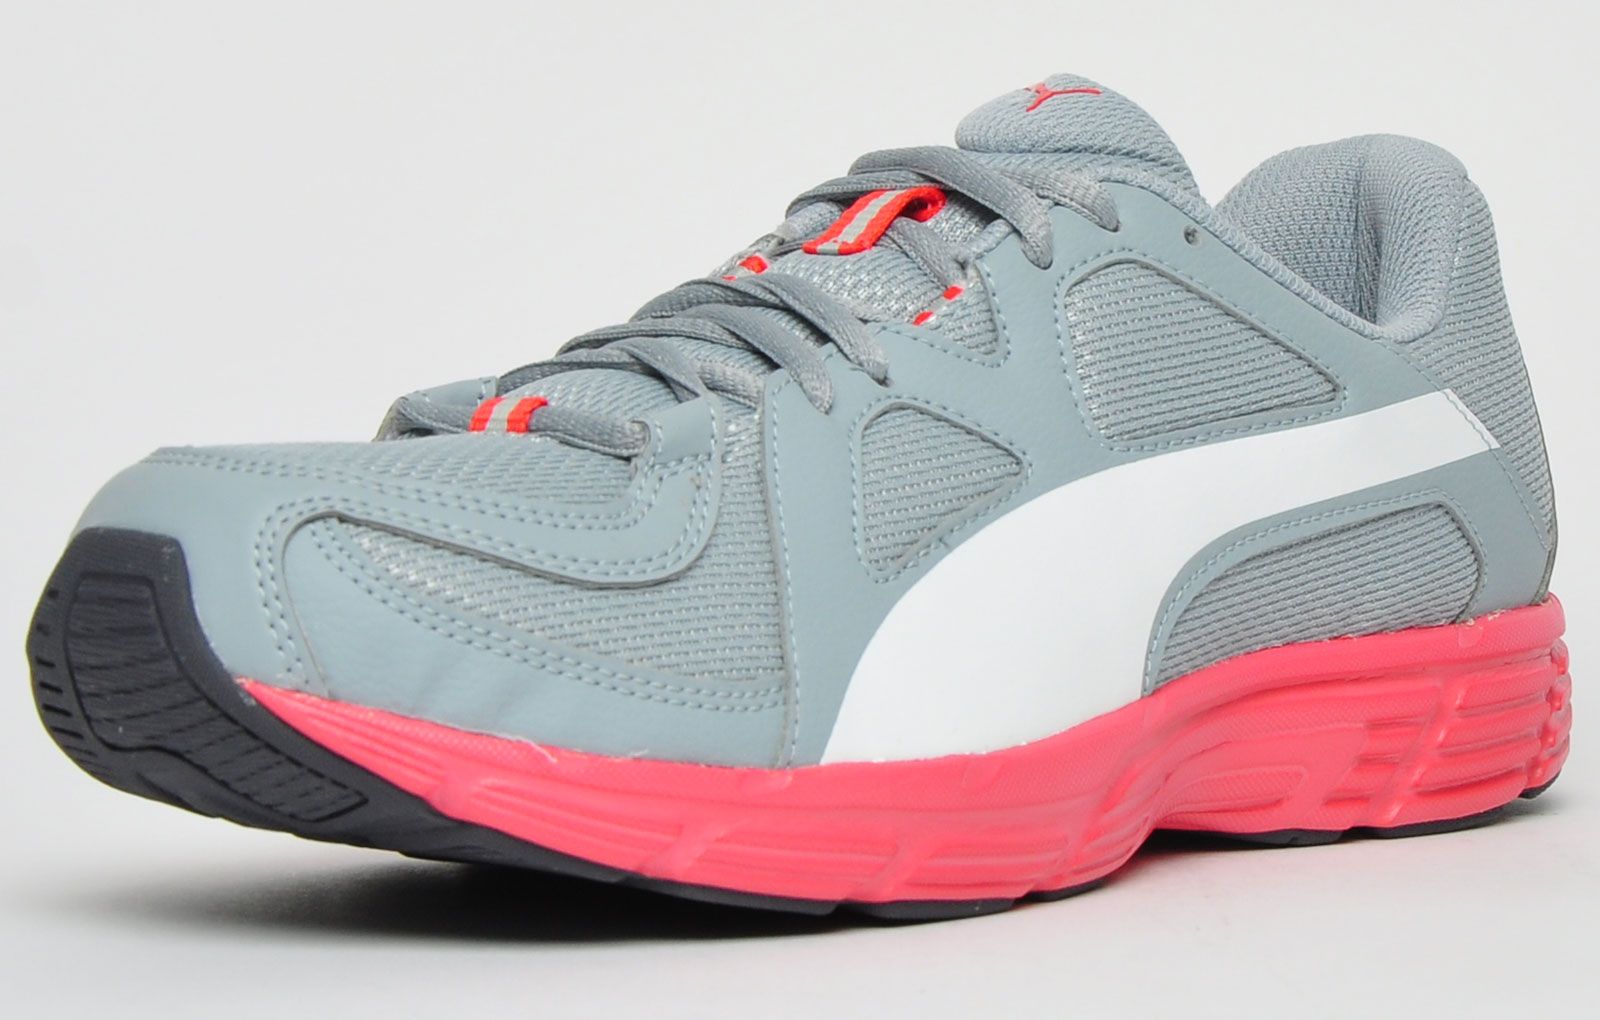 This versatile running shoe from Puma, the Axis is ideal if you’re looking for a shoe that will not only pound the tracks and streets but will do a great job in the gym also. The Axis won’t let you down on looks either, with its clean-cut silhouette and striking colourway this is definitely one to pick up at this amazingly low price. <p>The Puma Axis is constructed from a soft breathable textile/mesh upper and benefits from an Ortholite Sockliner for extra cushioning, and moisture management and an Archtec midsole support system to increase stability while running or in the gym. The Axis is nicely finished off with tasteful Puma branding to the tongue, upper and heel, combining this with a durable outsole and a shoe that is very light in weight for its category your definitely onto a sure winner at this price.</p> <p>- Lightweight textile/mesh upper </p> <p>- Soft padded ankle and heel </p> <p>- Secure up front lace up closure </p> <p>- Durable rubber outsole offers traction </p> <p>- Heel support for added stability</p> <p>- Puma branding throughout</p>